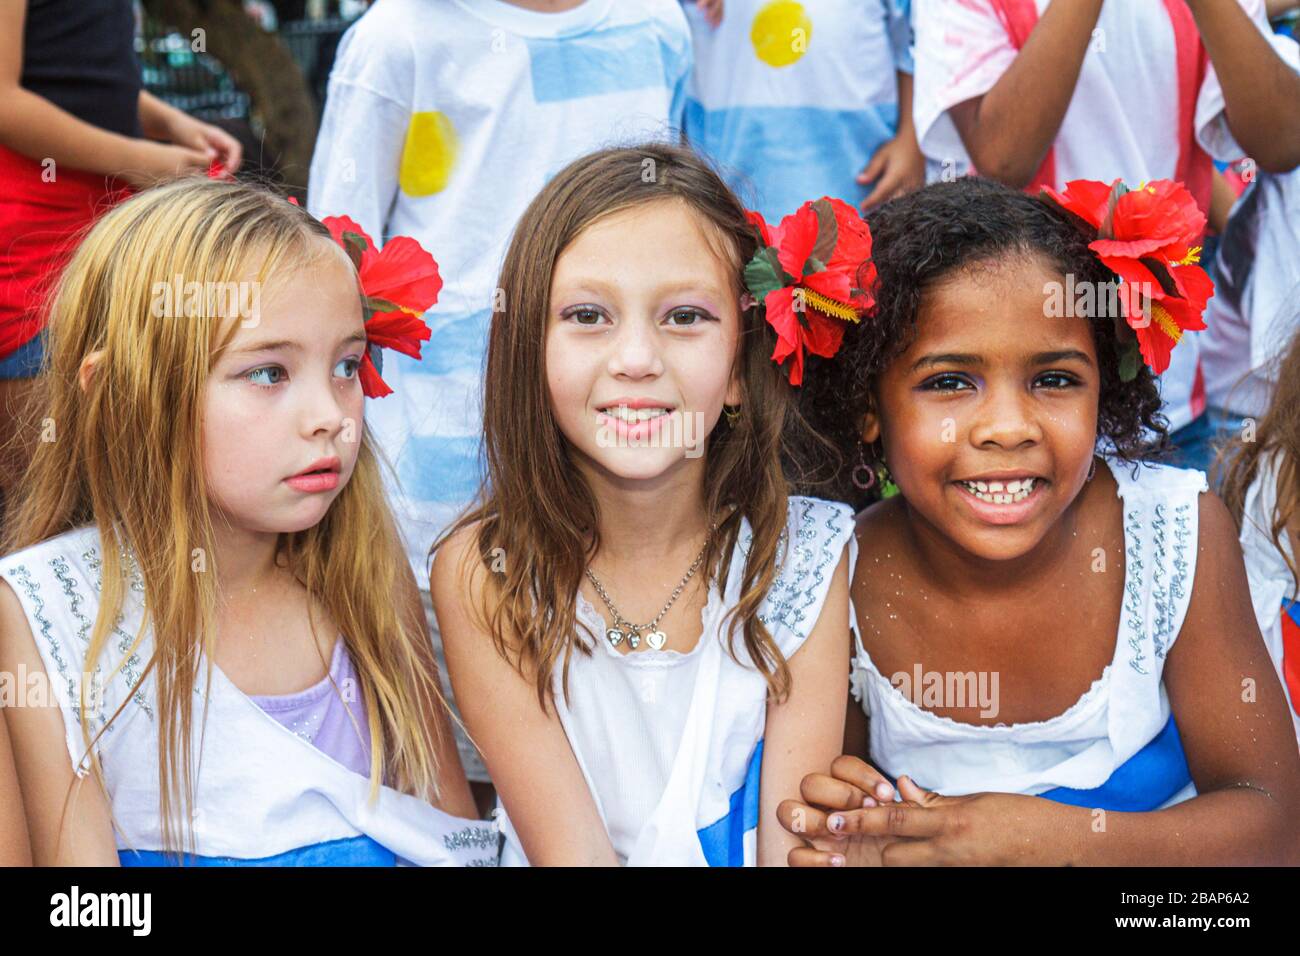 Miami Beach Florida,North Beach,Northshore Park,Hispanic Heritage Festival,girl girls,youngster youngsters youth youths female kid kids child children Stock Photo